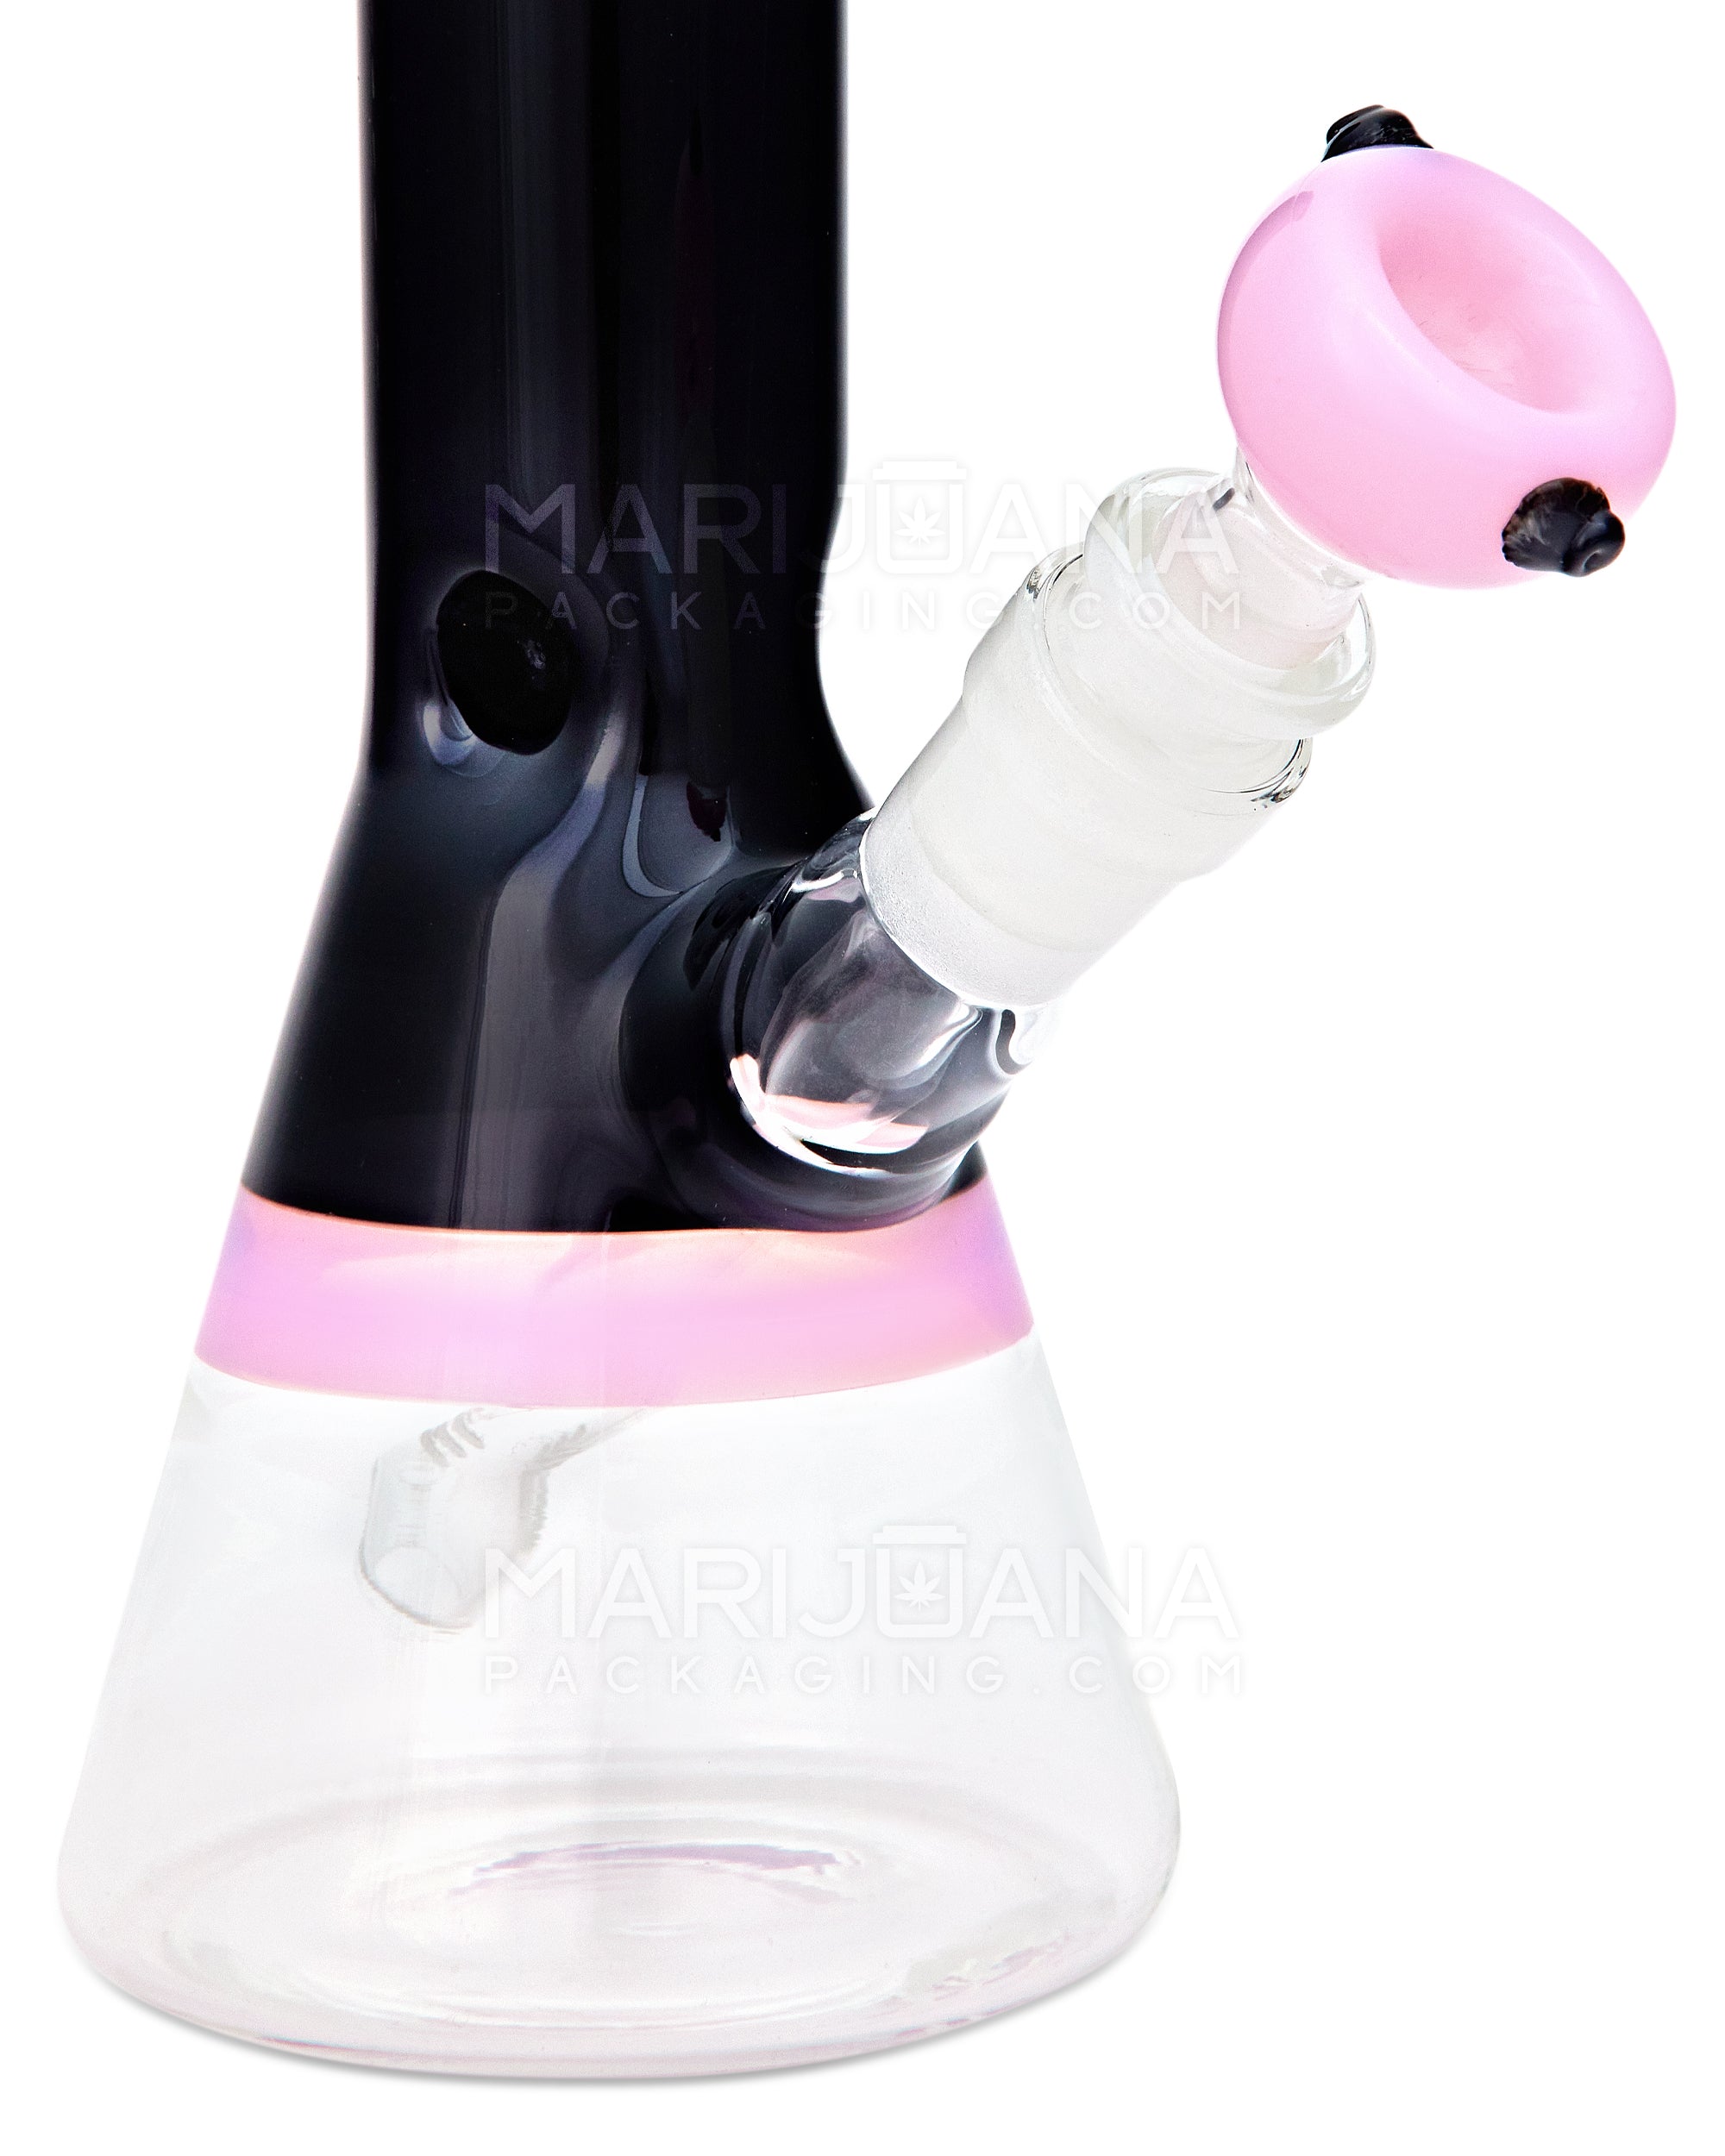 Painted Straight Neck Diffused Downstem Glass Beaker Water Pipe | 10in Tall - 14mm Bowl - Pink & Black - 3